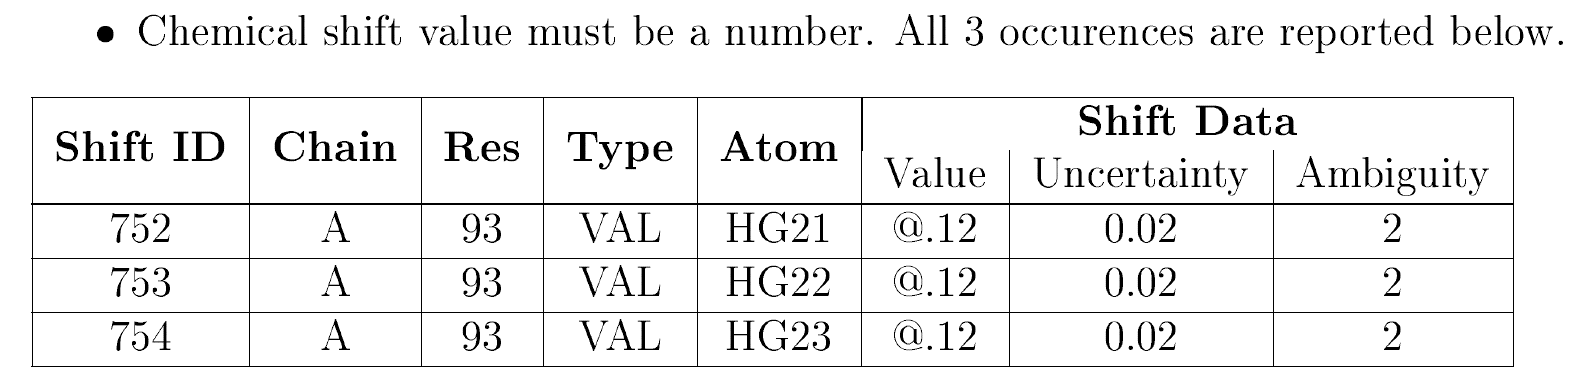 NMR shifts value must be a number …​ table